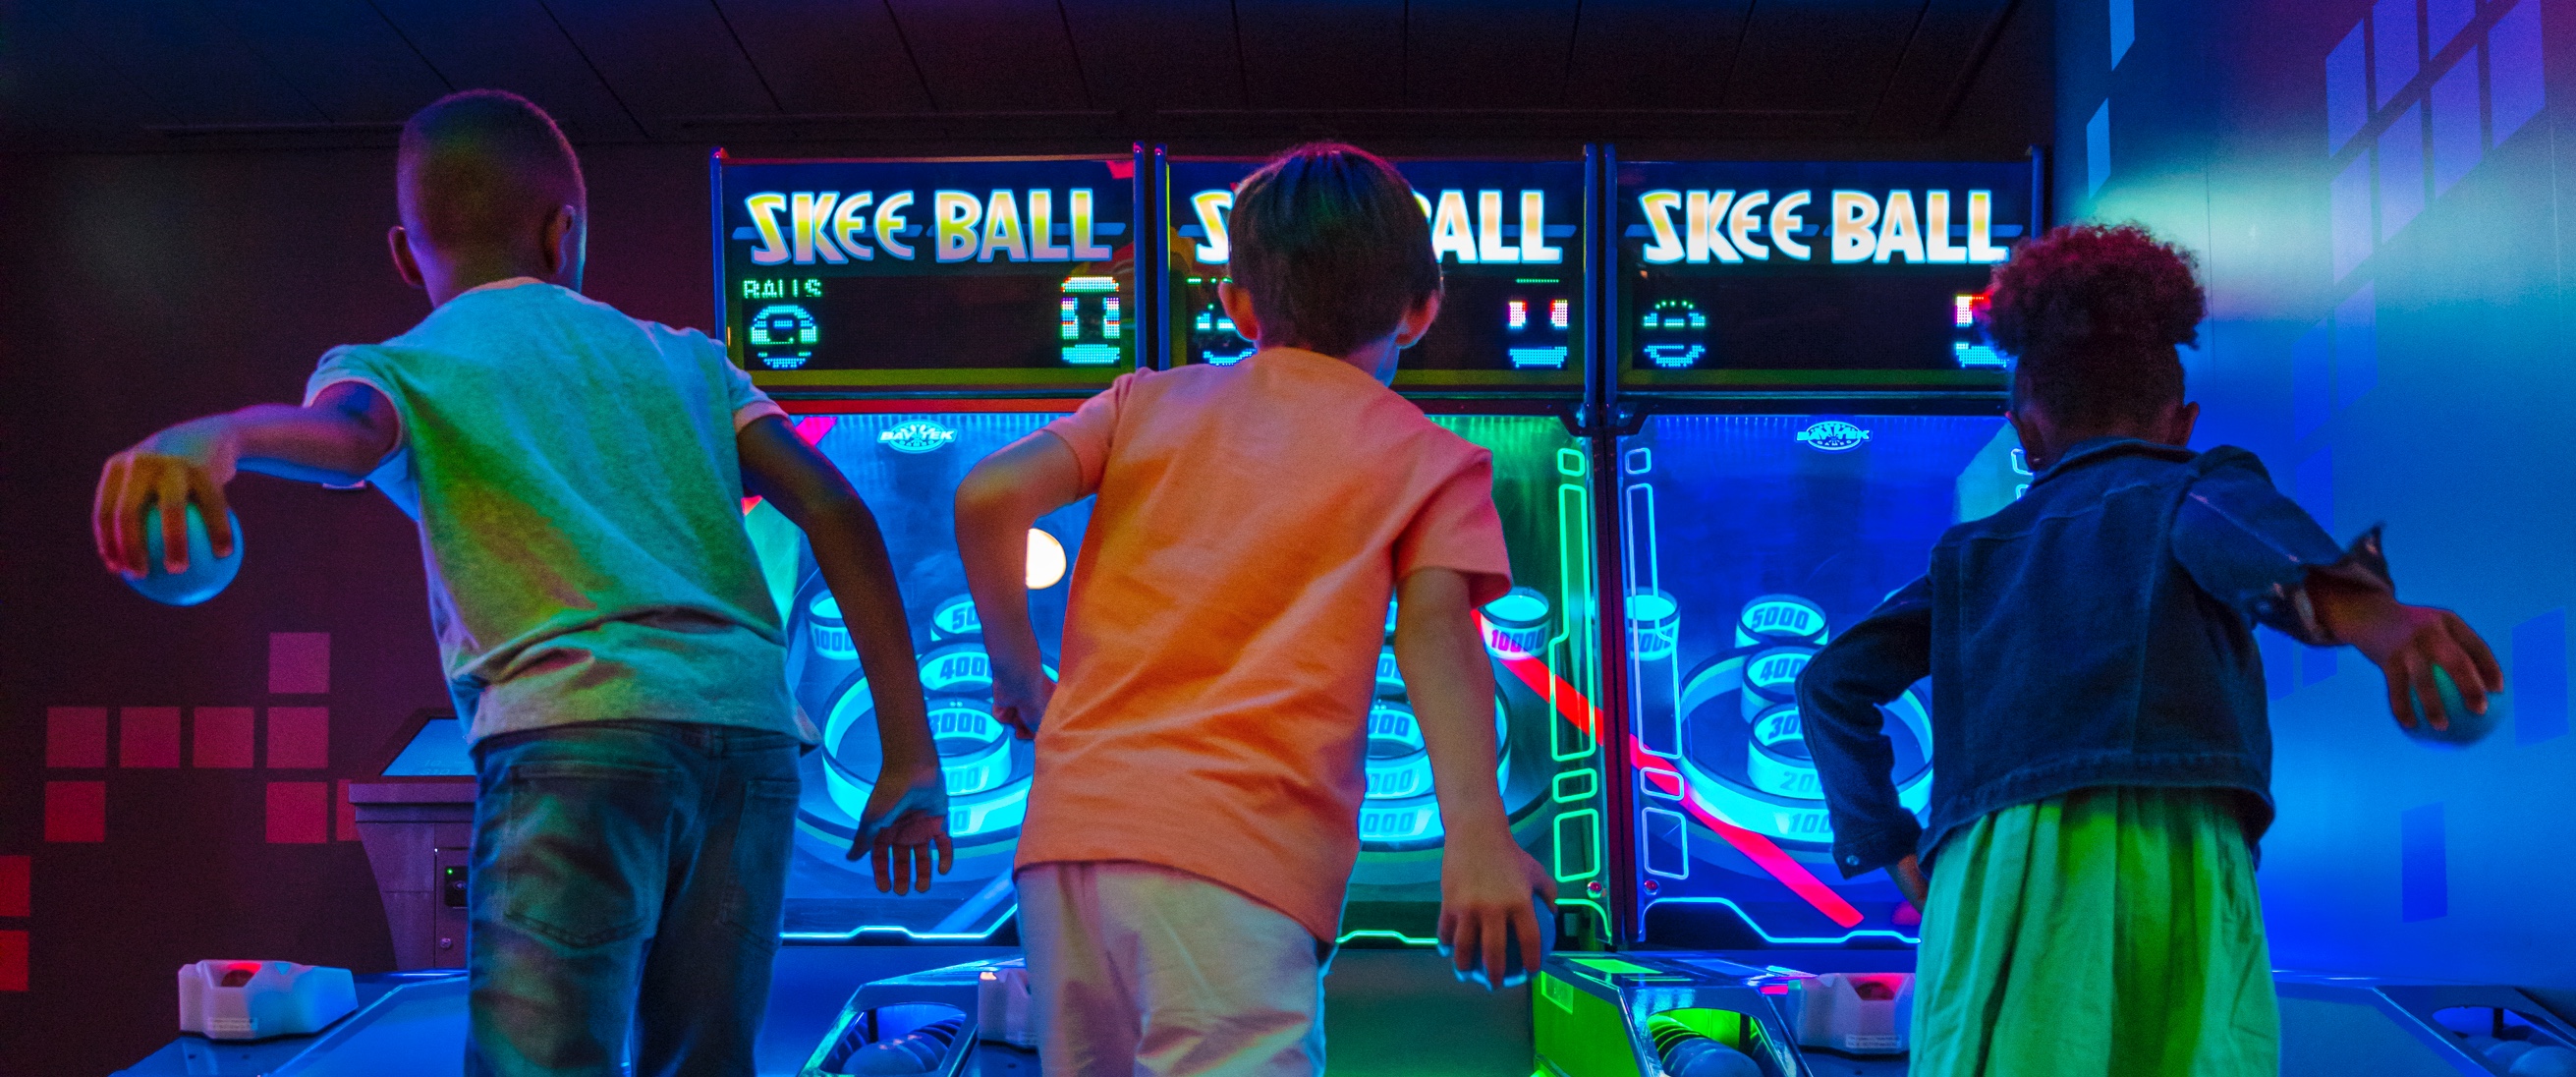 Kids Playing Skee Ball at the Playmakers Sports Arcade Bar.